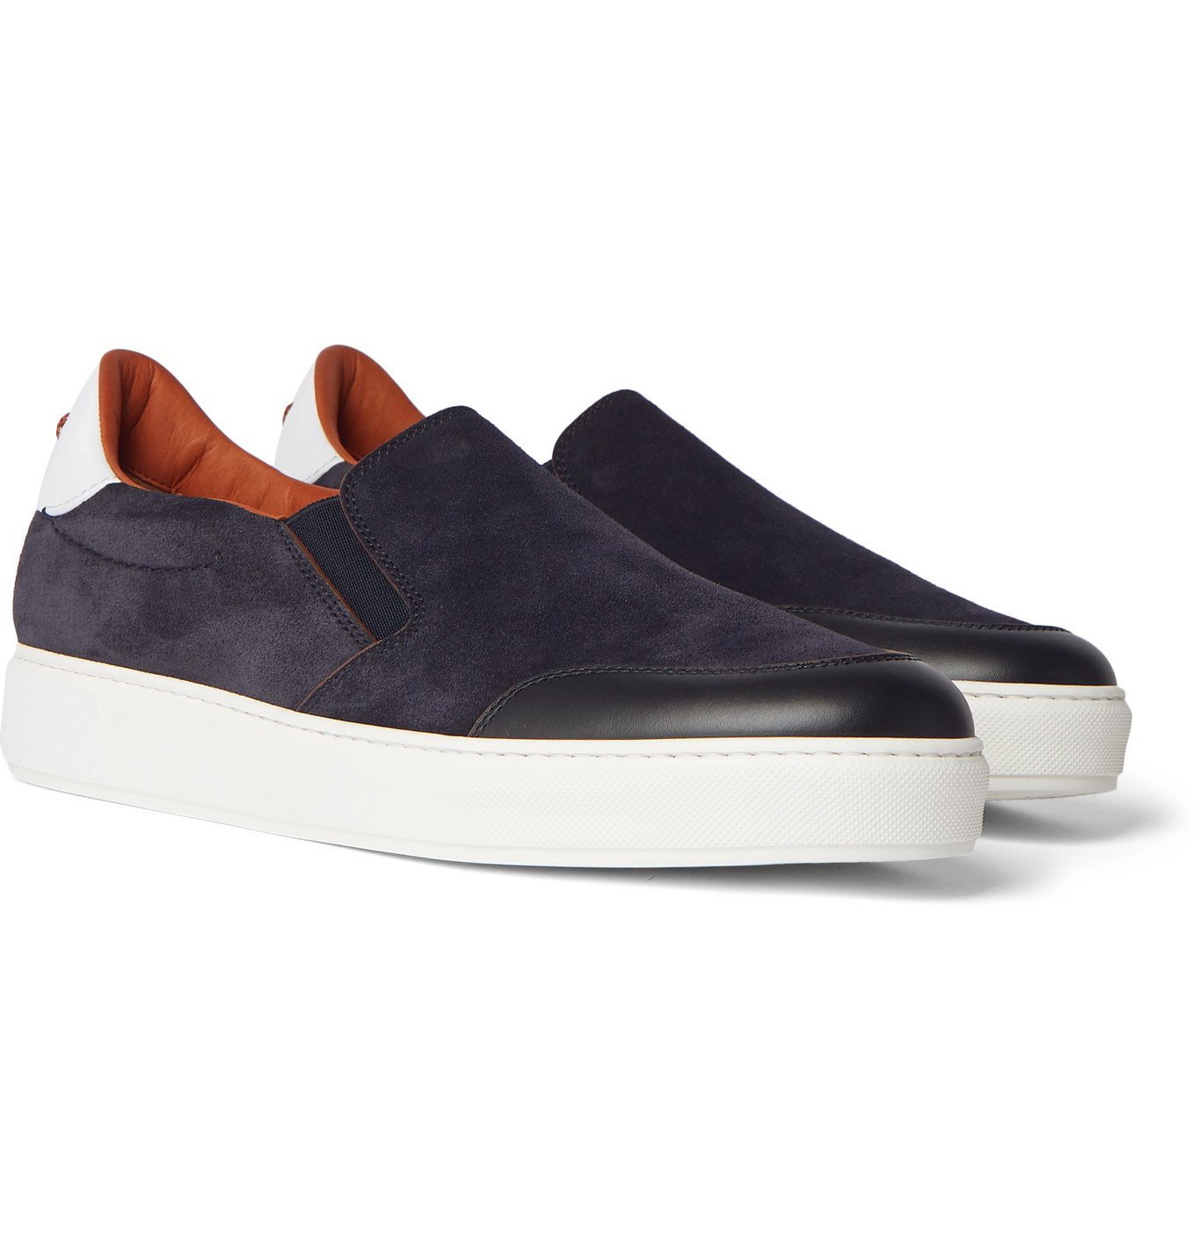 COUTURE LEather TIZIANO Sneakers